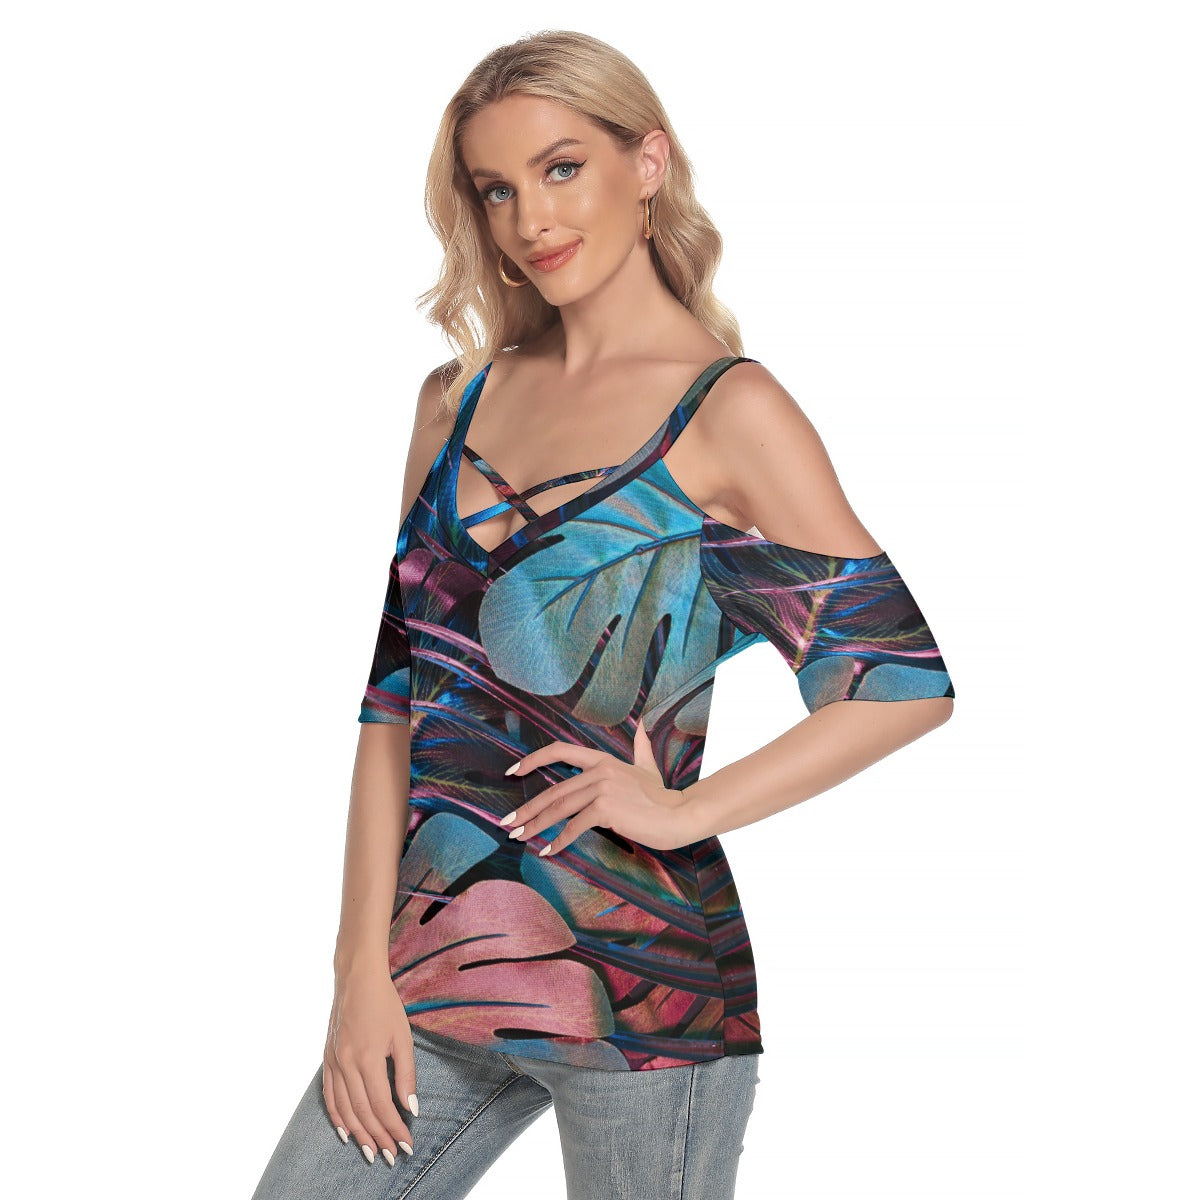 Women's Cold Shoulder T-shirt with Criss Cross Strips